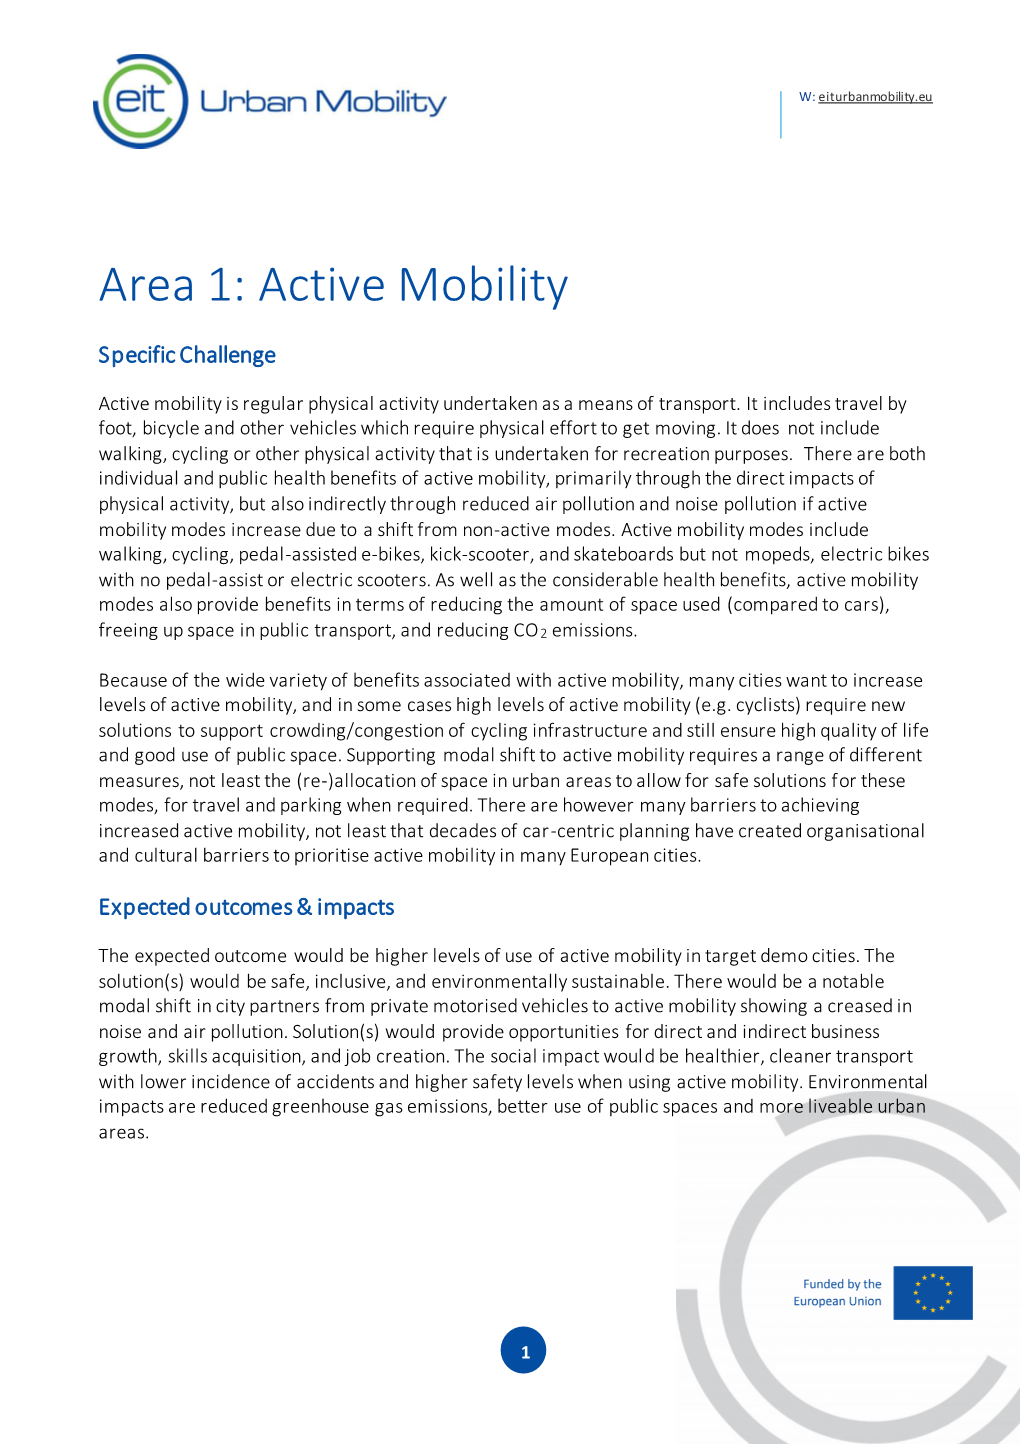 Area 1: Active Mobility